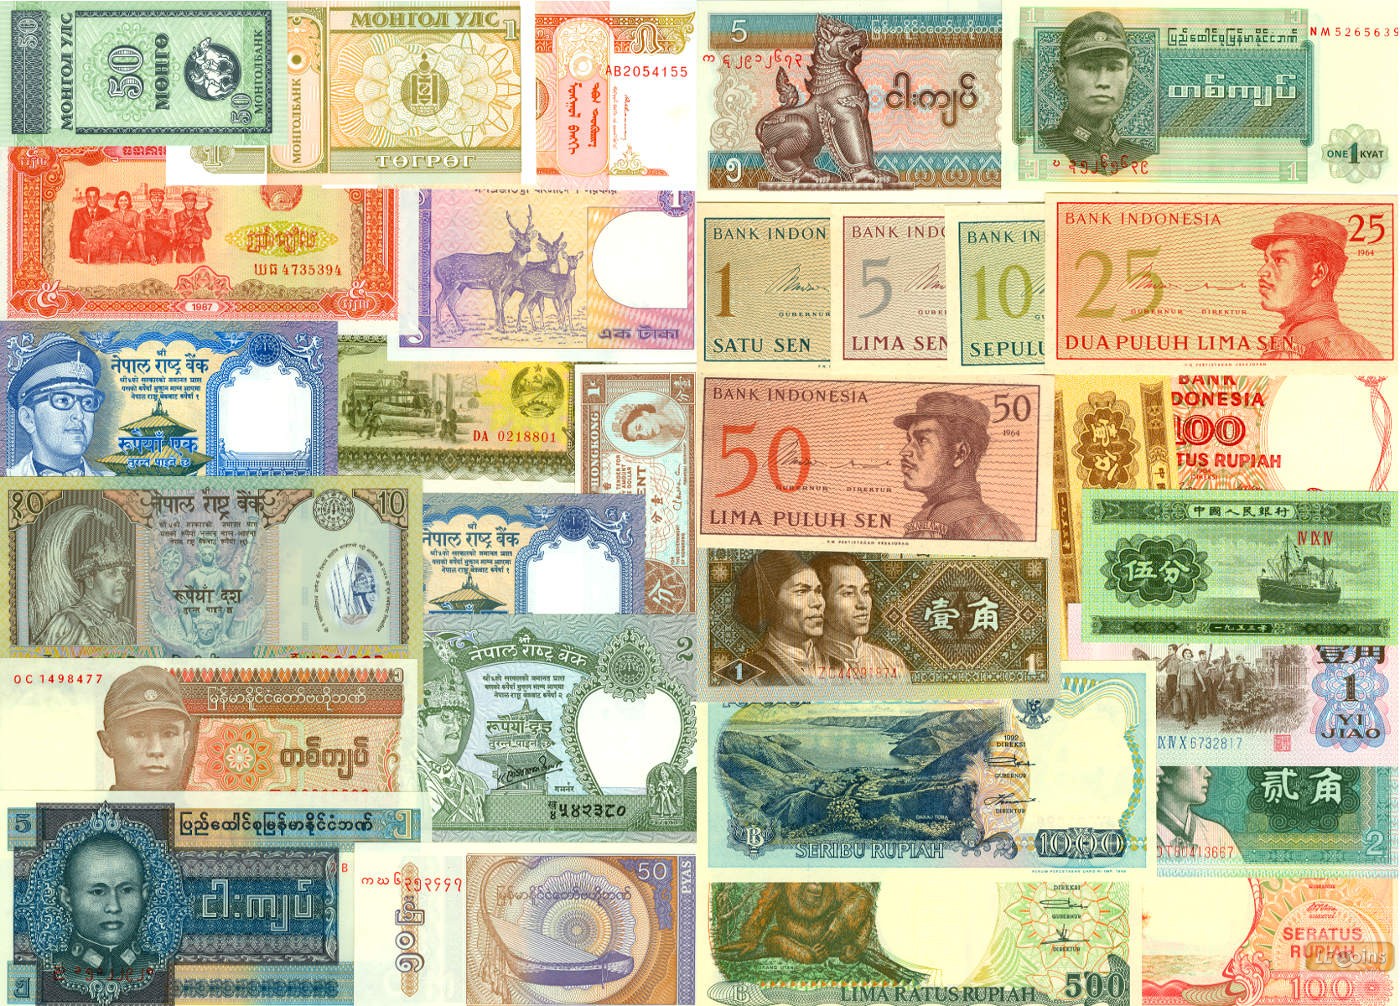 Lot: ASIEN / ASIA  Mix  30x Banknote  I  [1971-2002]